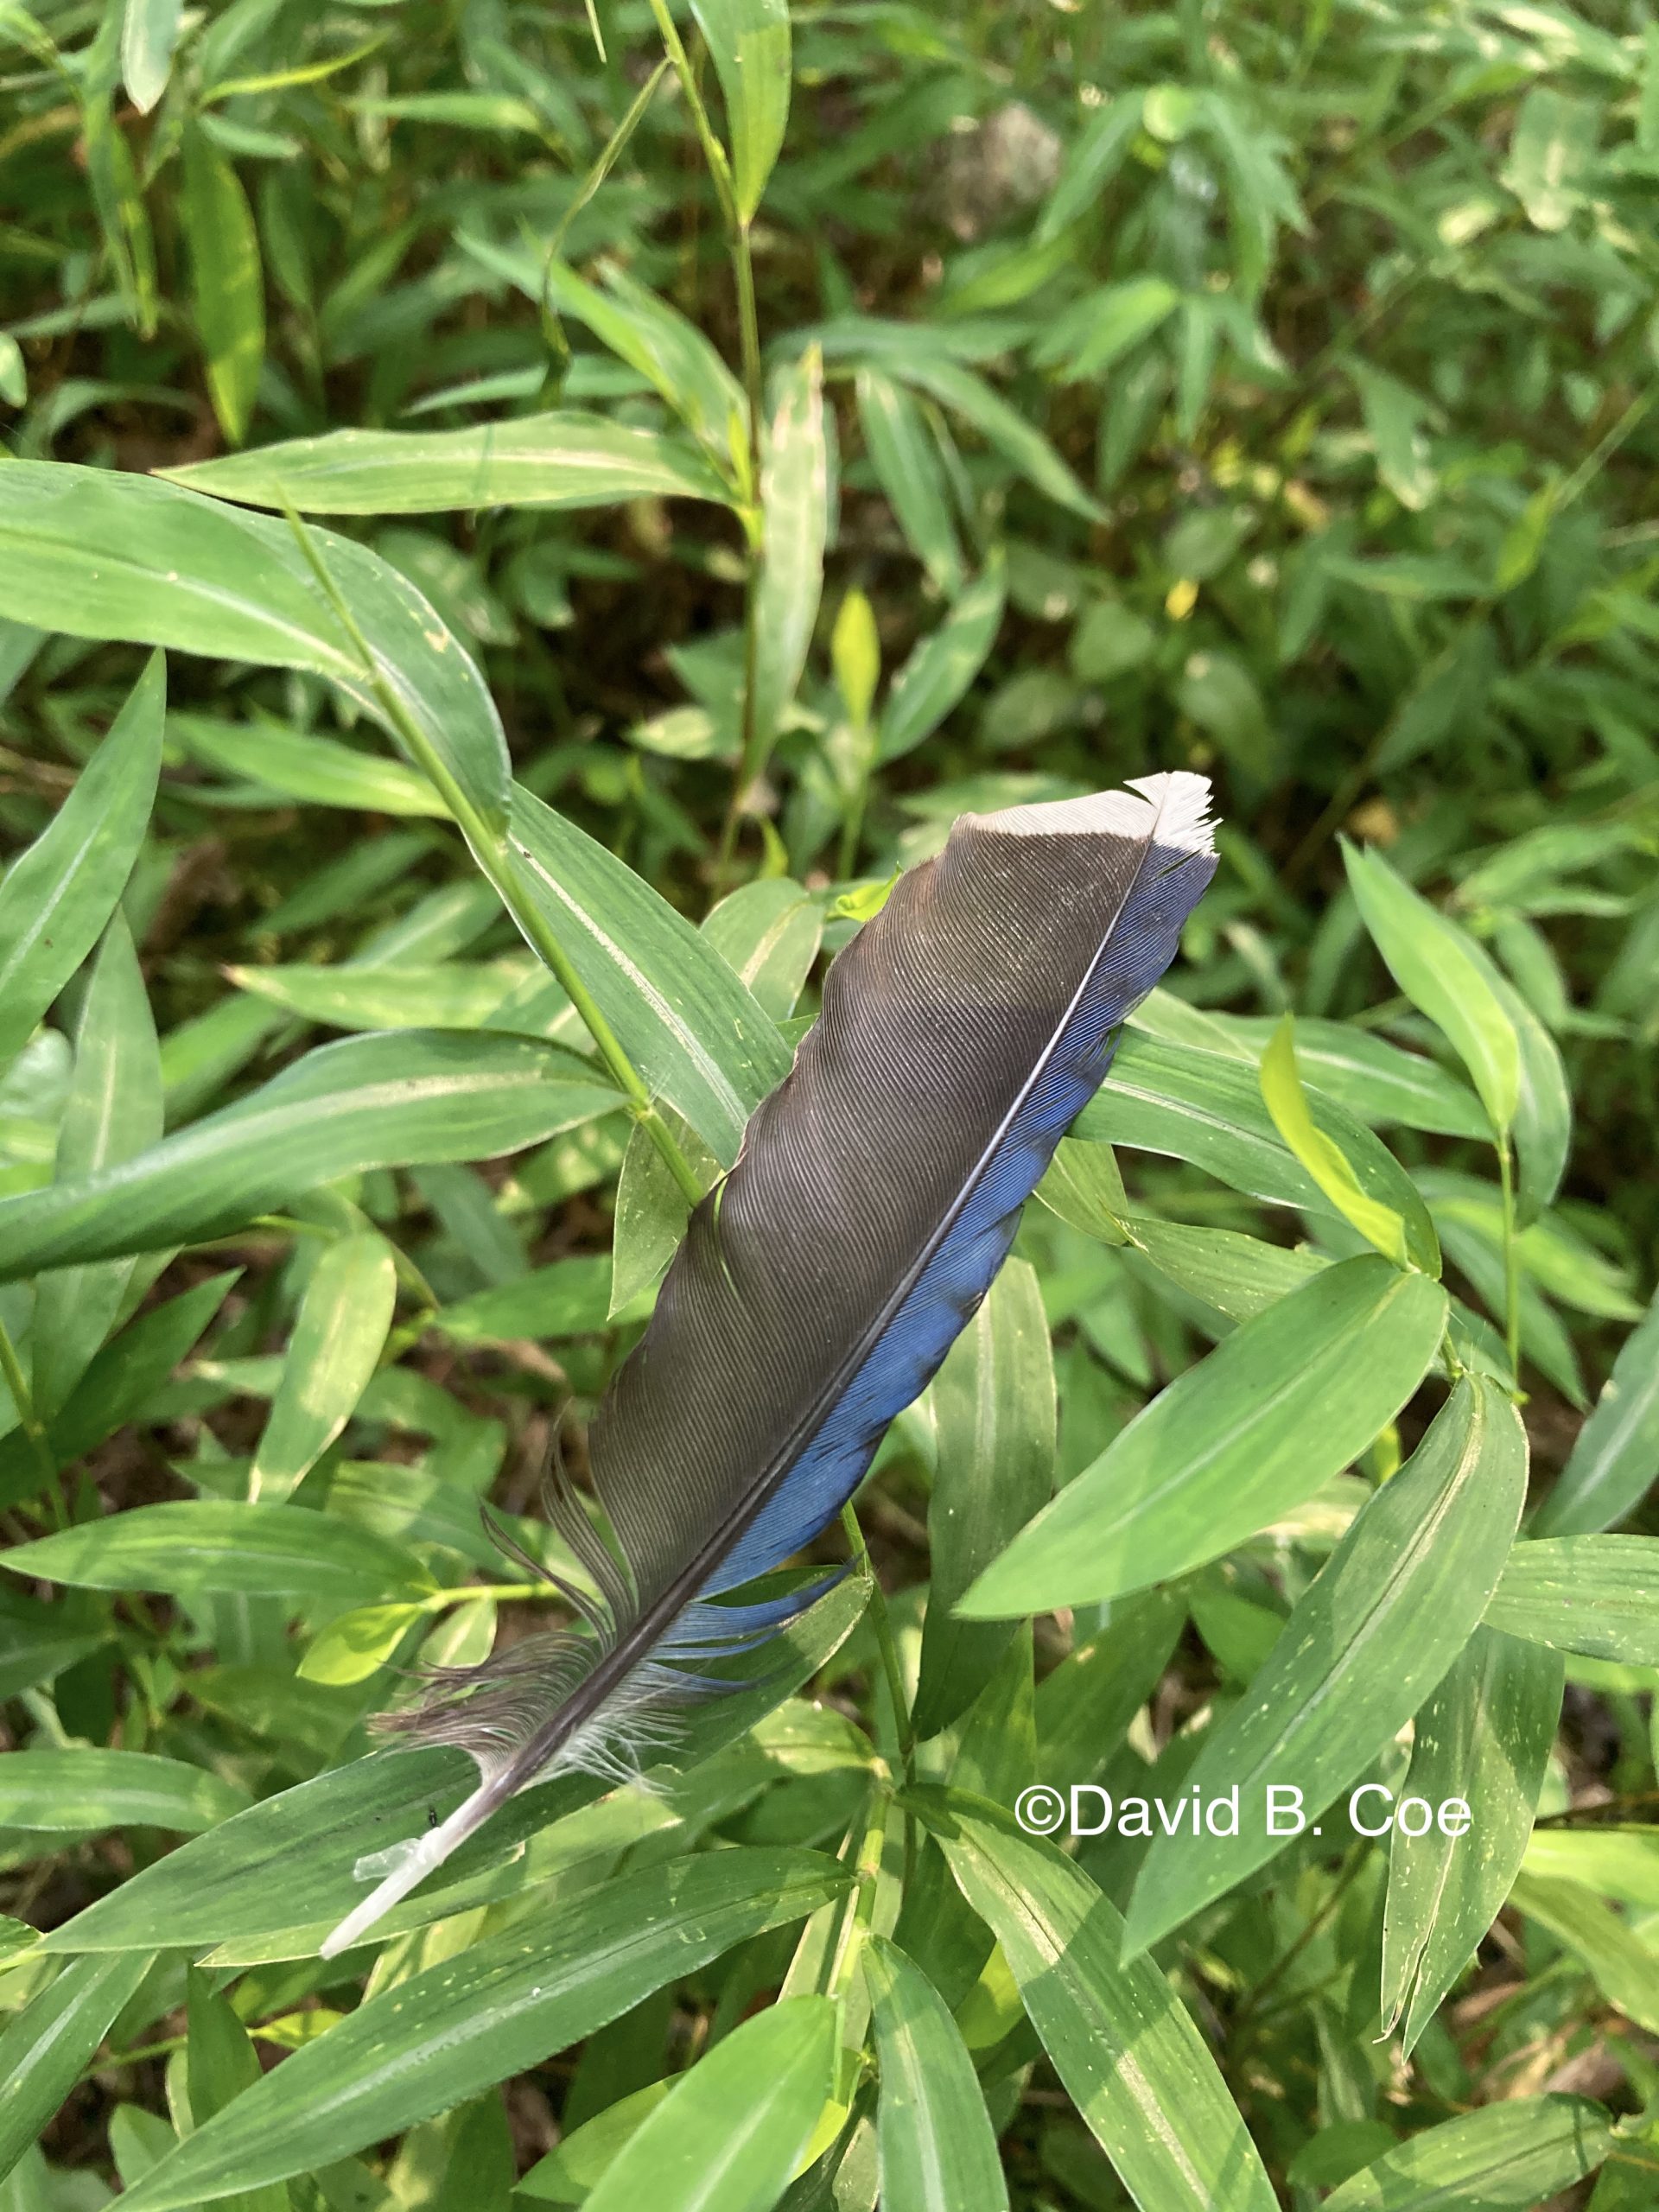 Blue Jay Feather, by David B. Coe